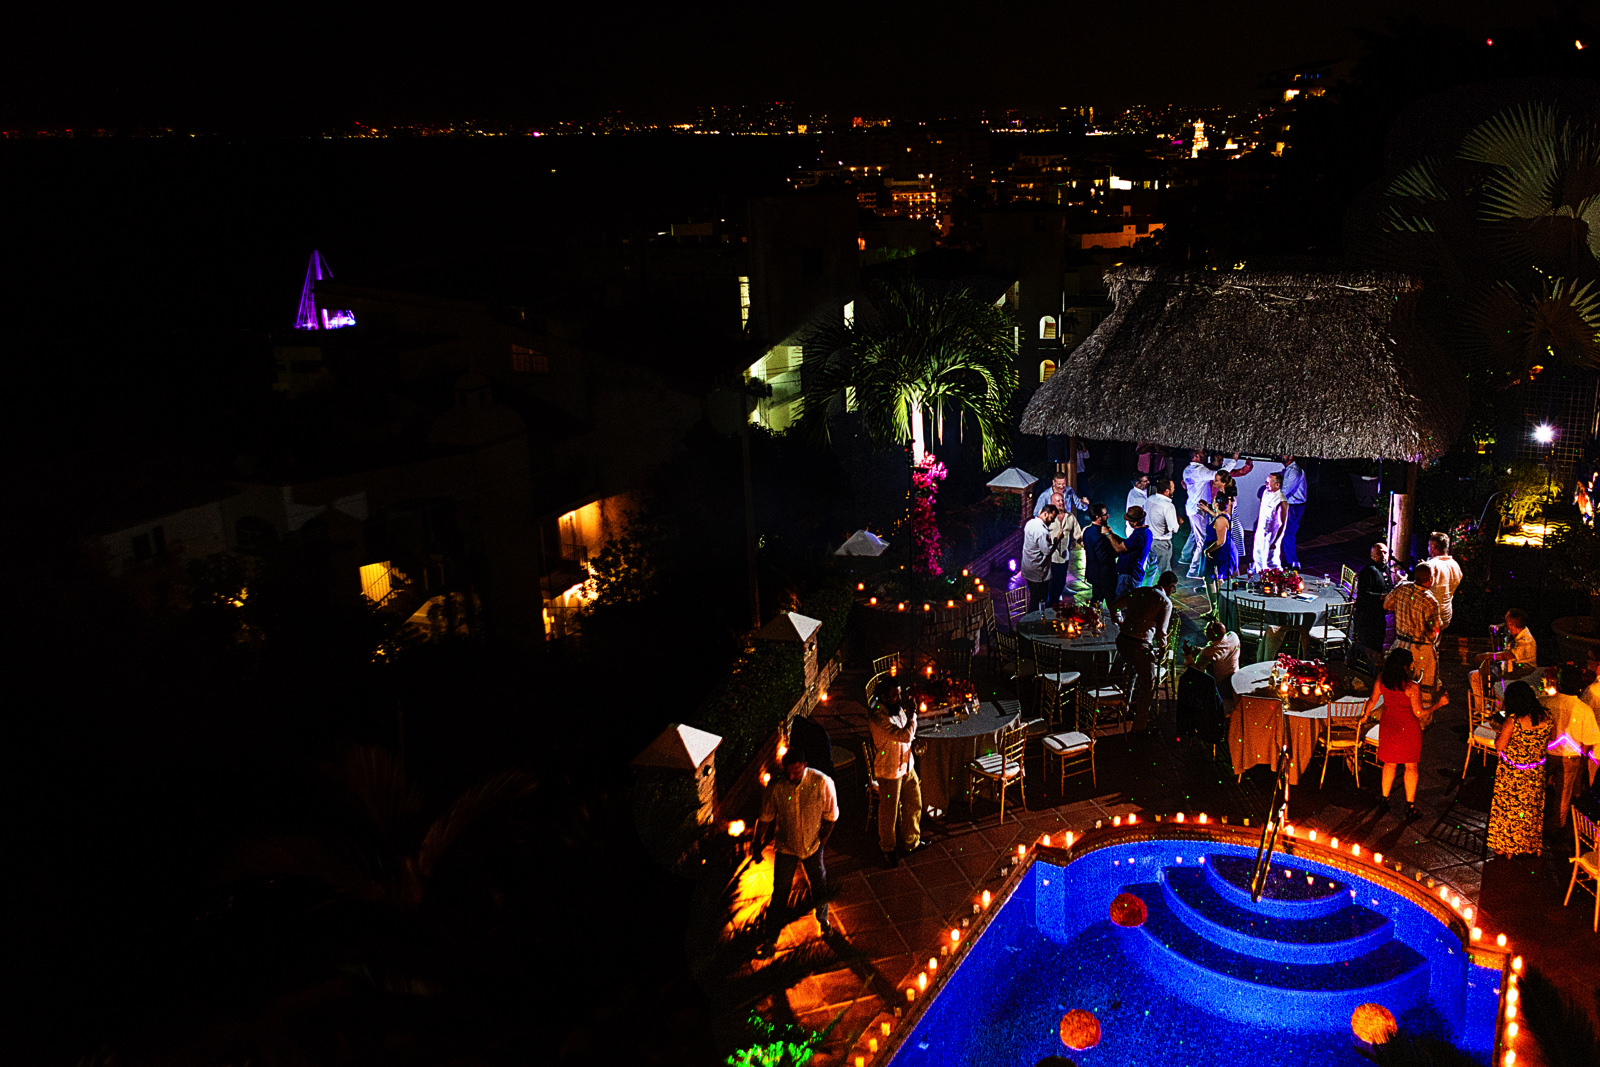 Overview of the destination wedding party at Casa Muni during the Puerto Vallarta night